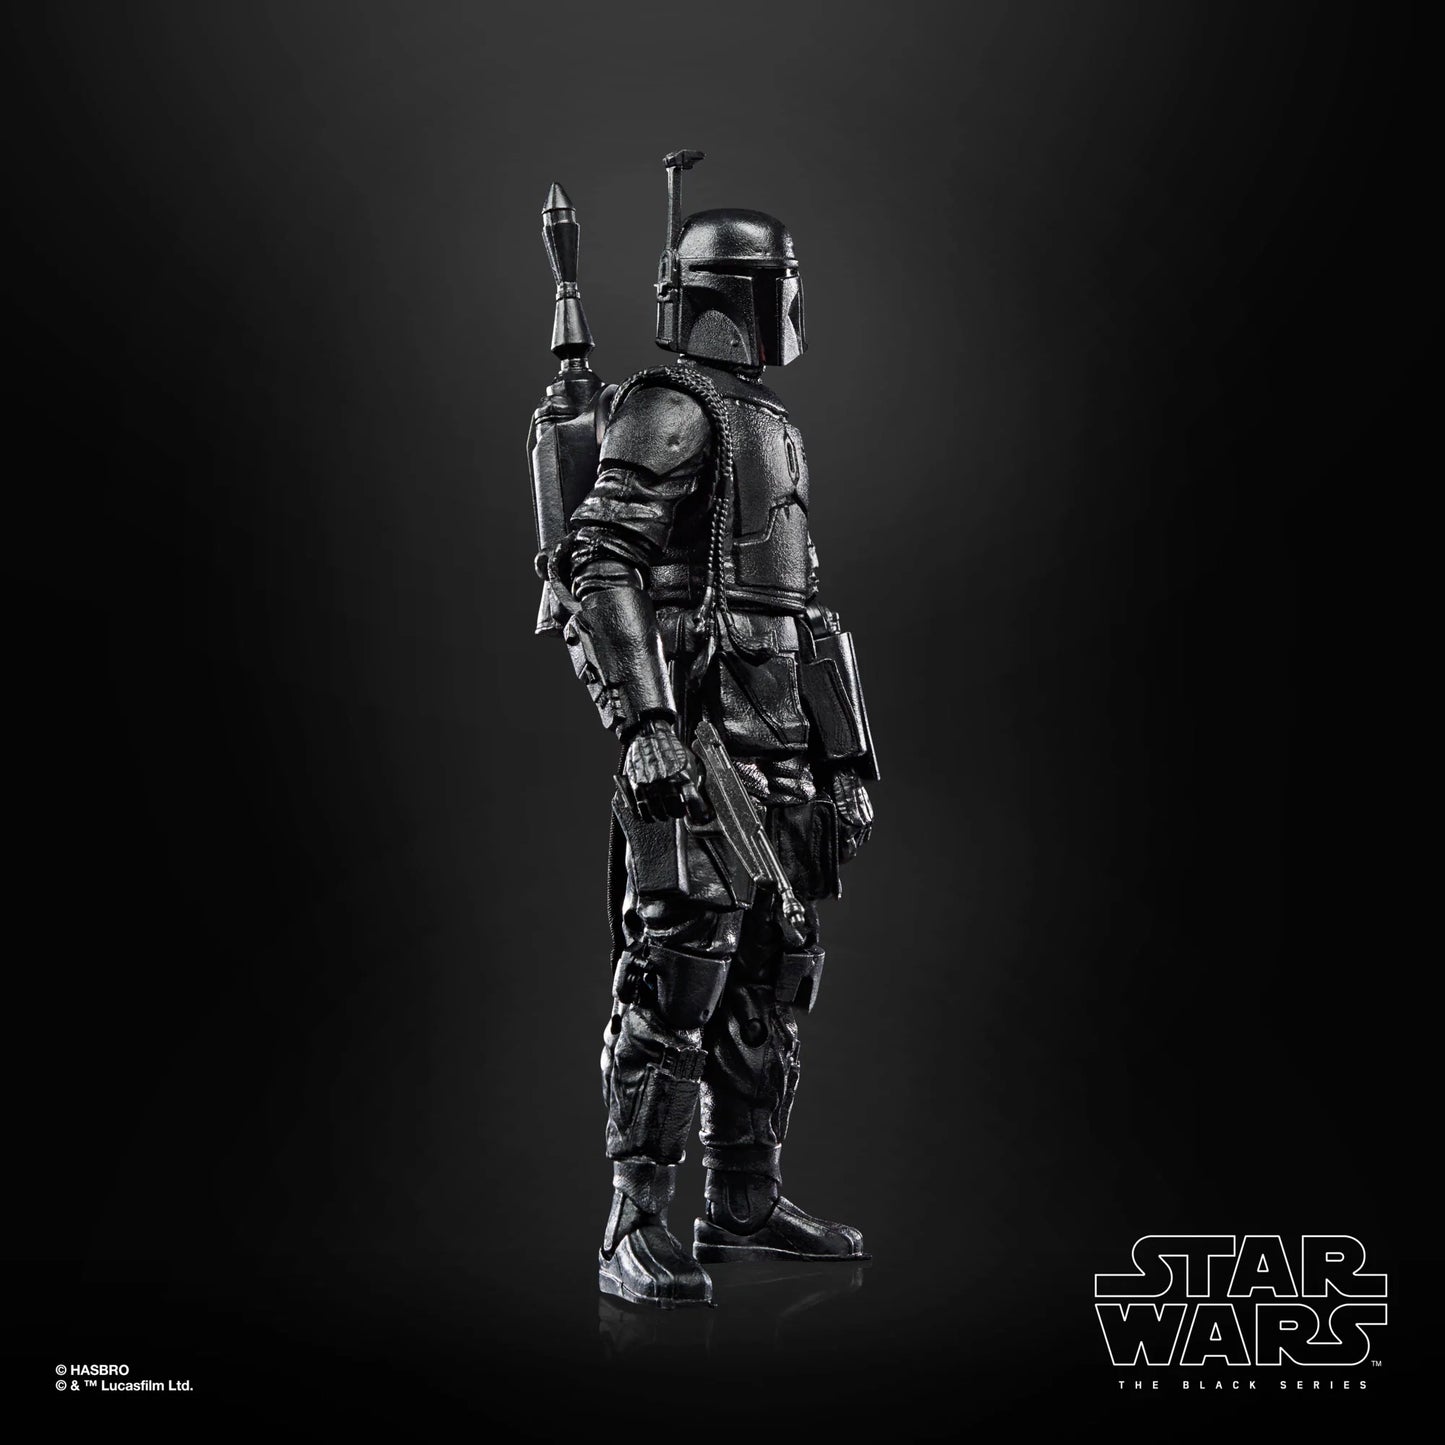 Star Wars The Black Series Boba Fett (In Disguise) Convention Exclusive